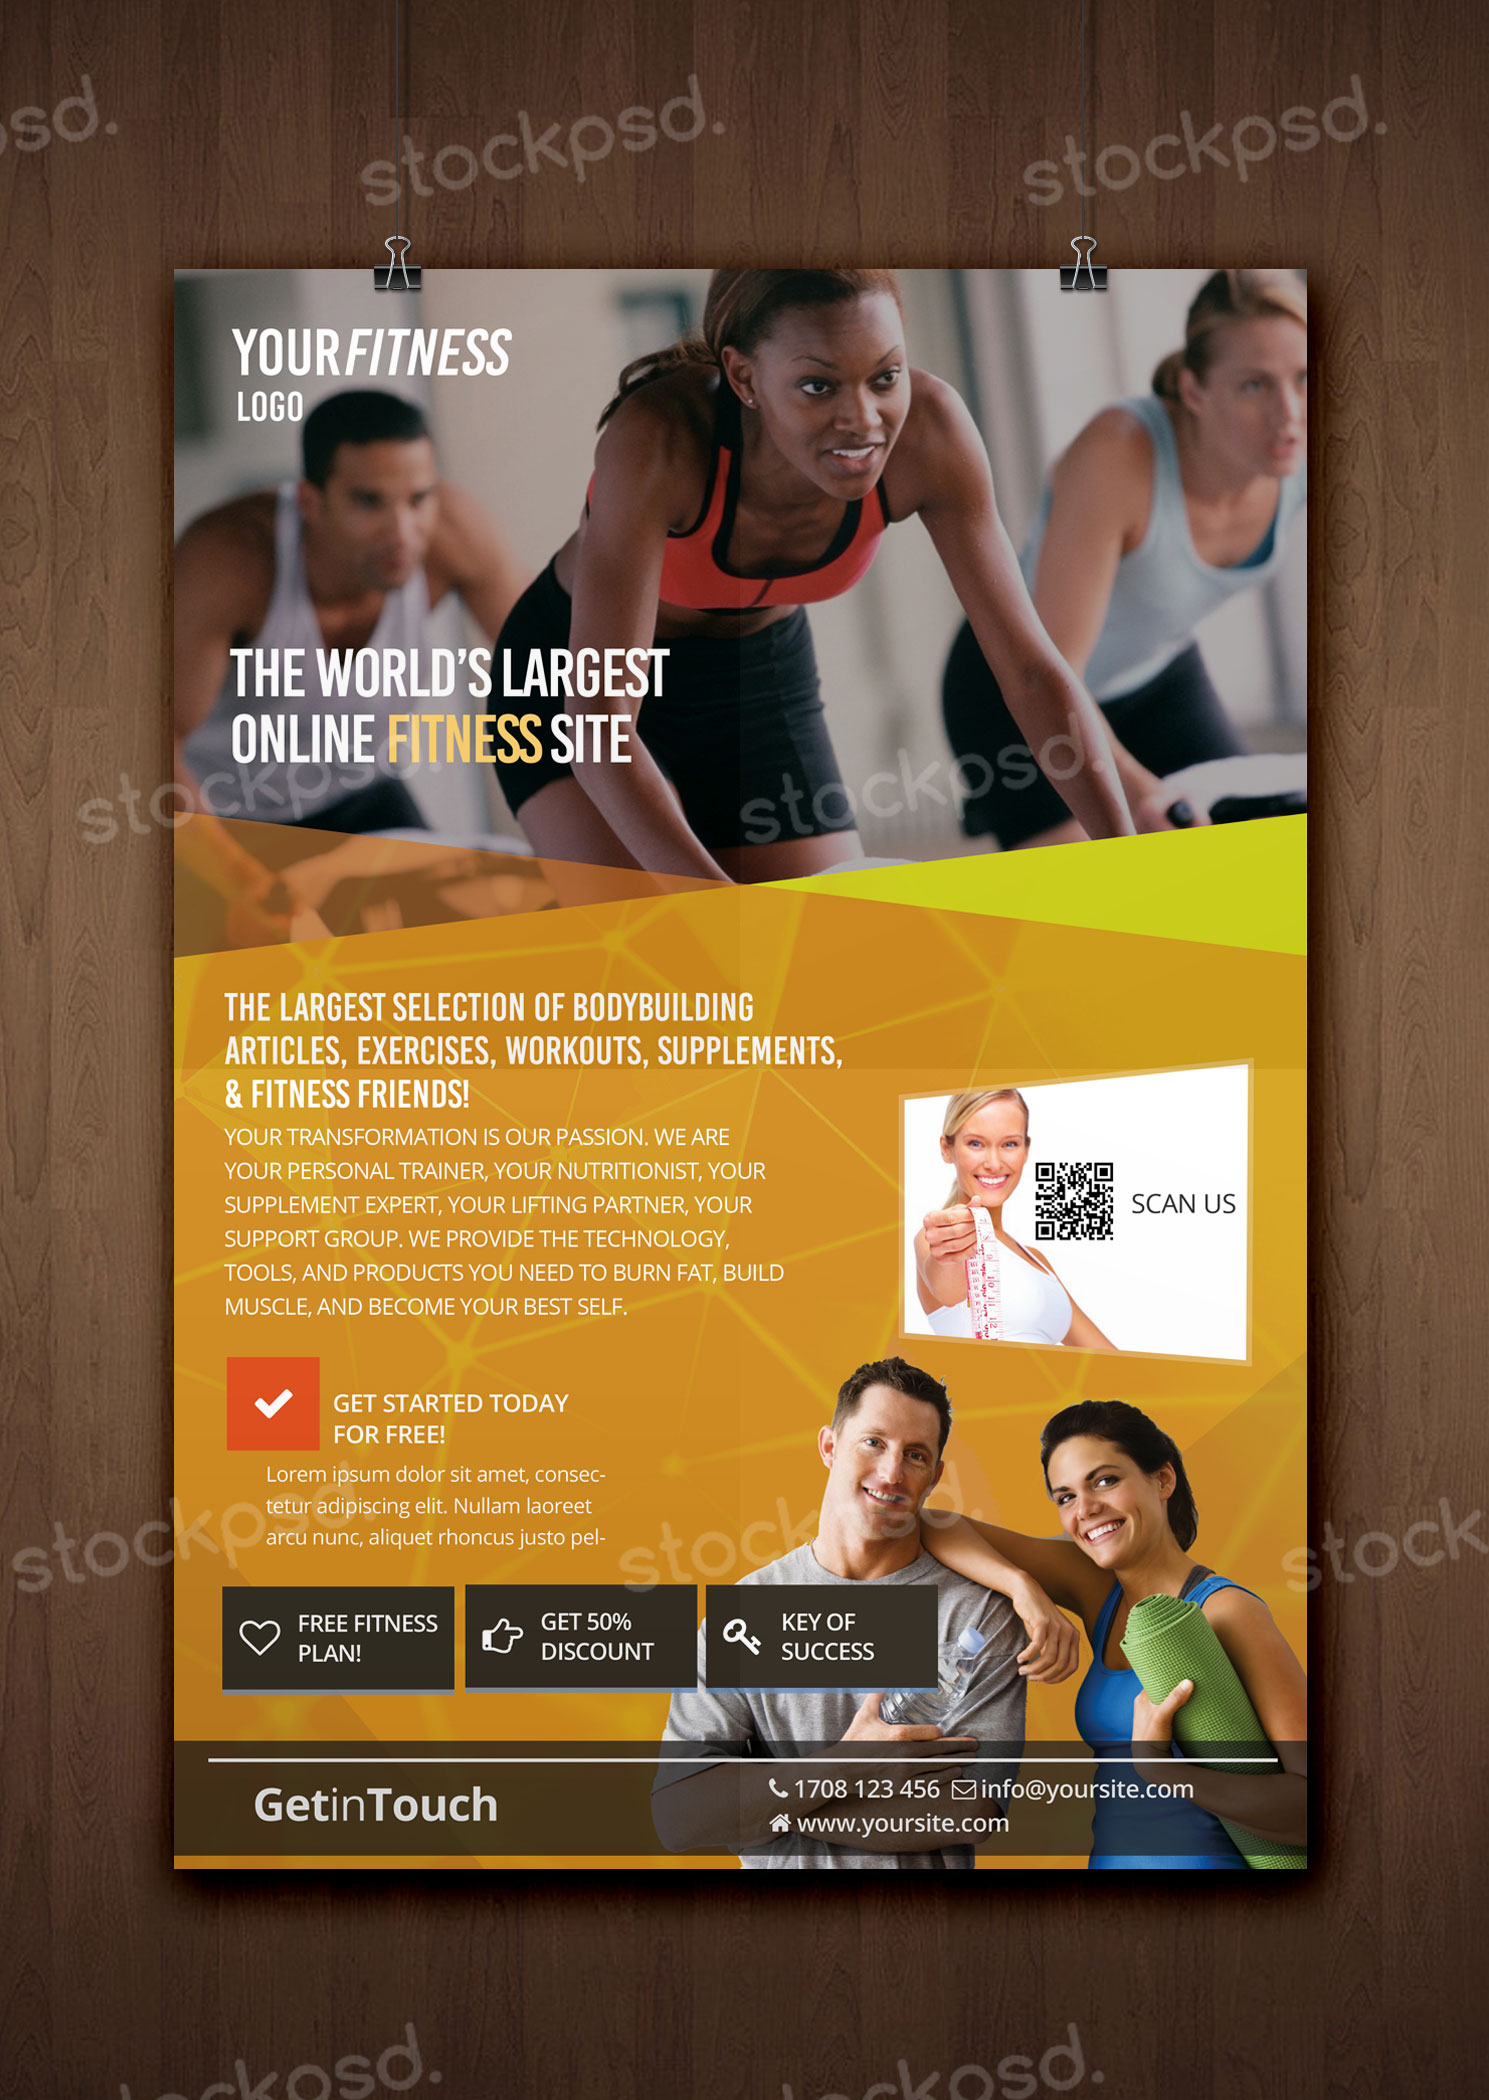 Fitness, Gym & Health – FREE PSD Flyer Template  StockPSD For Gym Open House Flyer Template Regarding Gym Open House Flyer Template